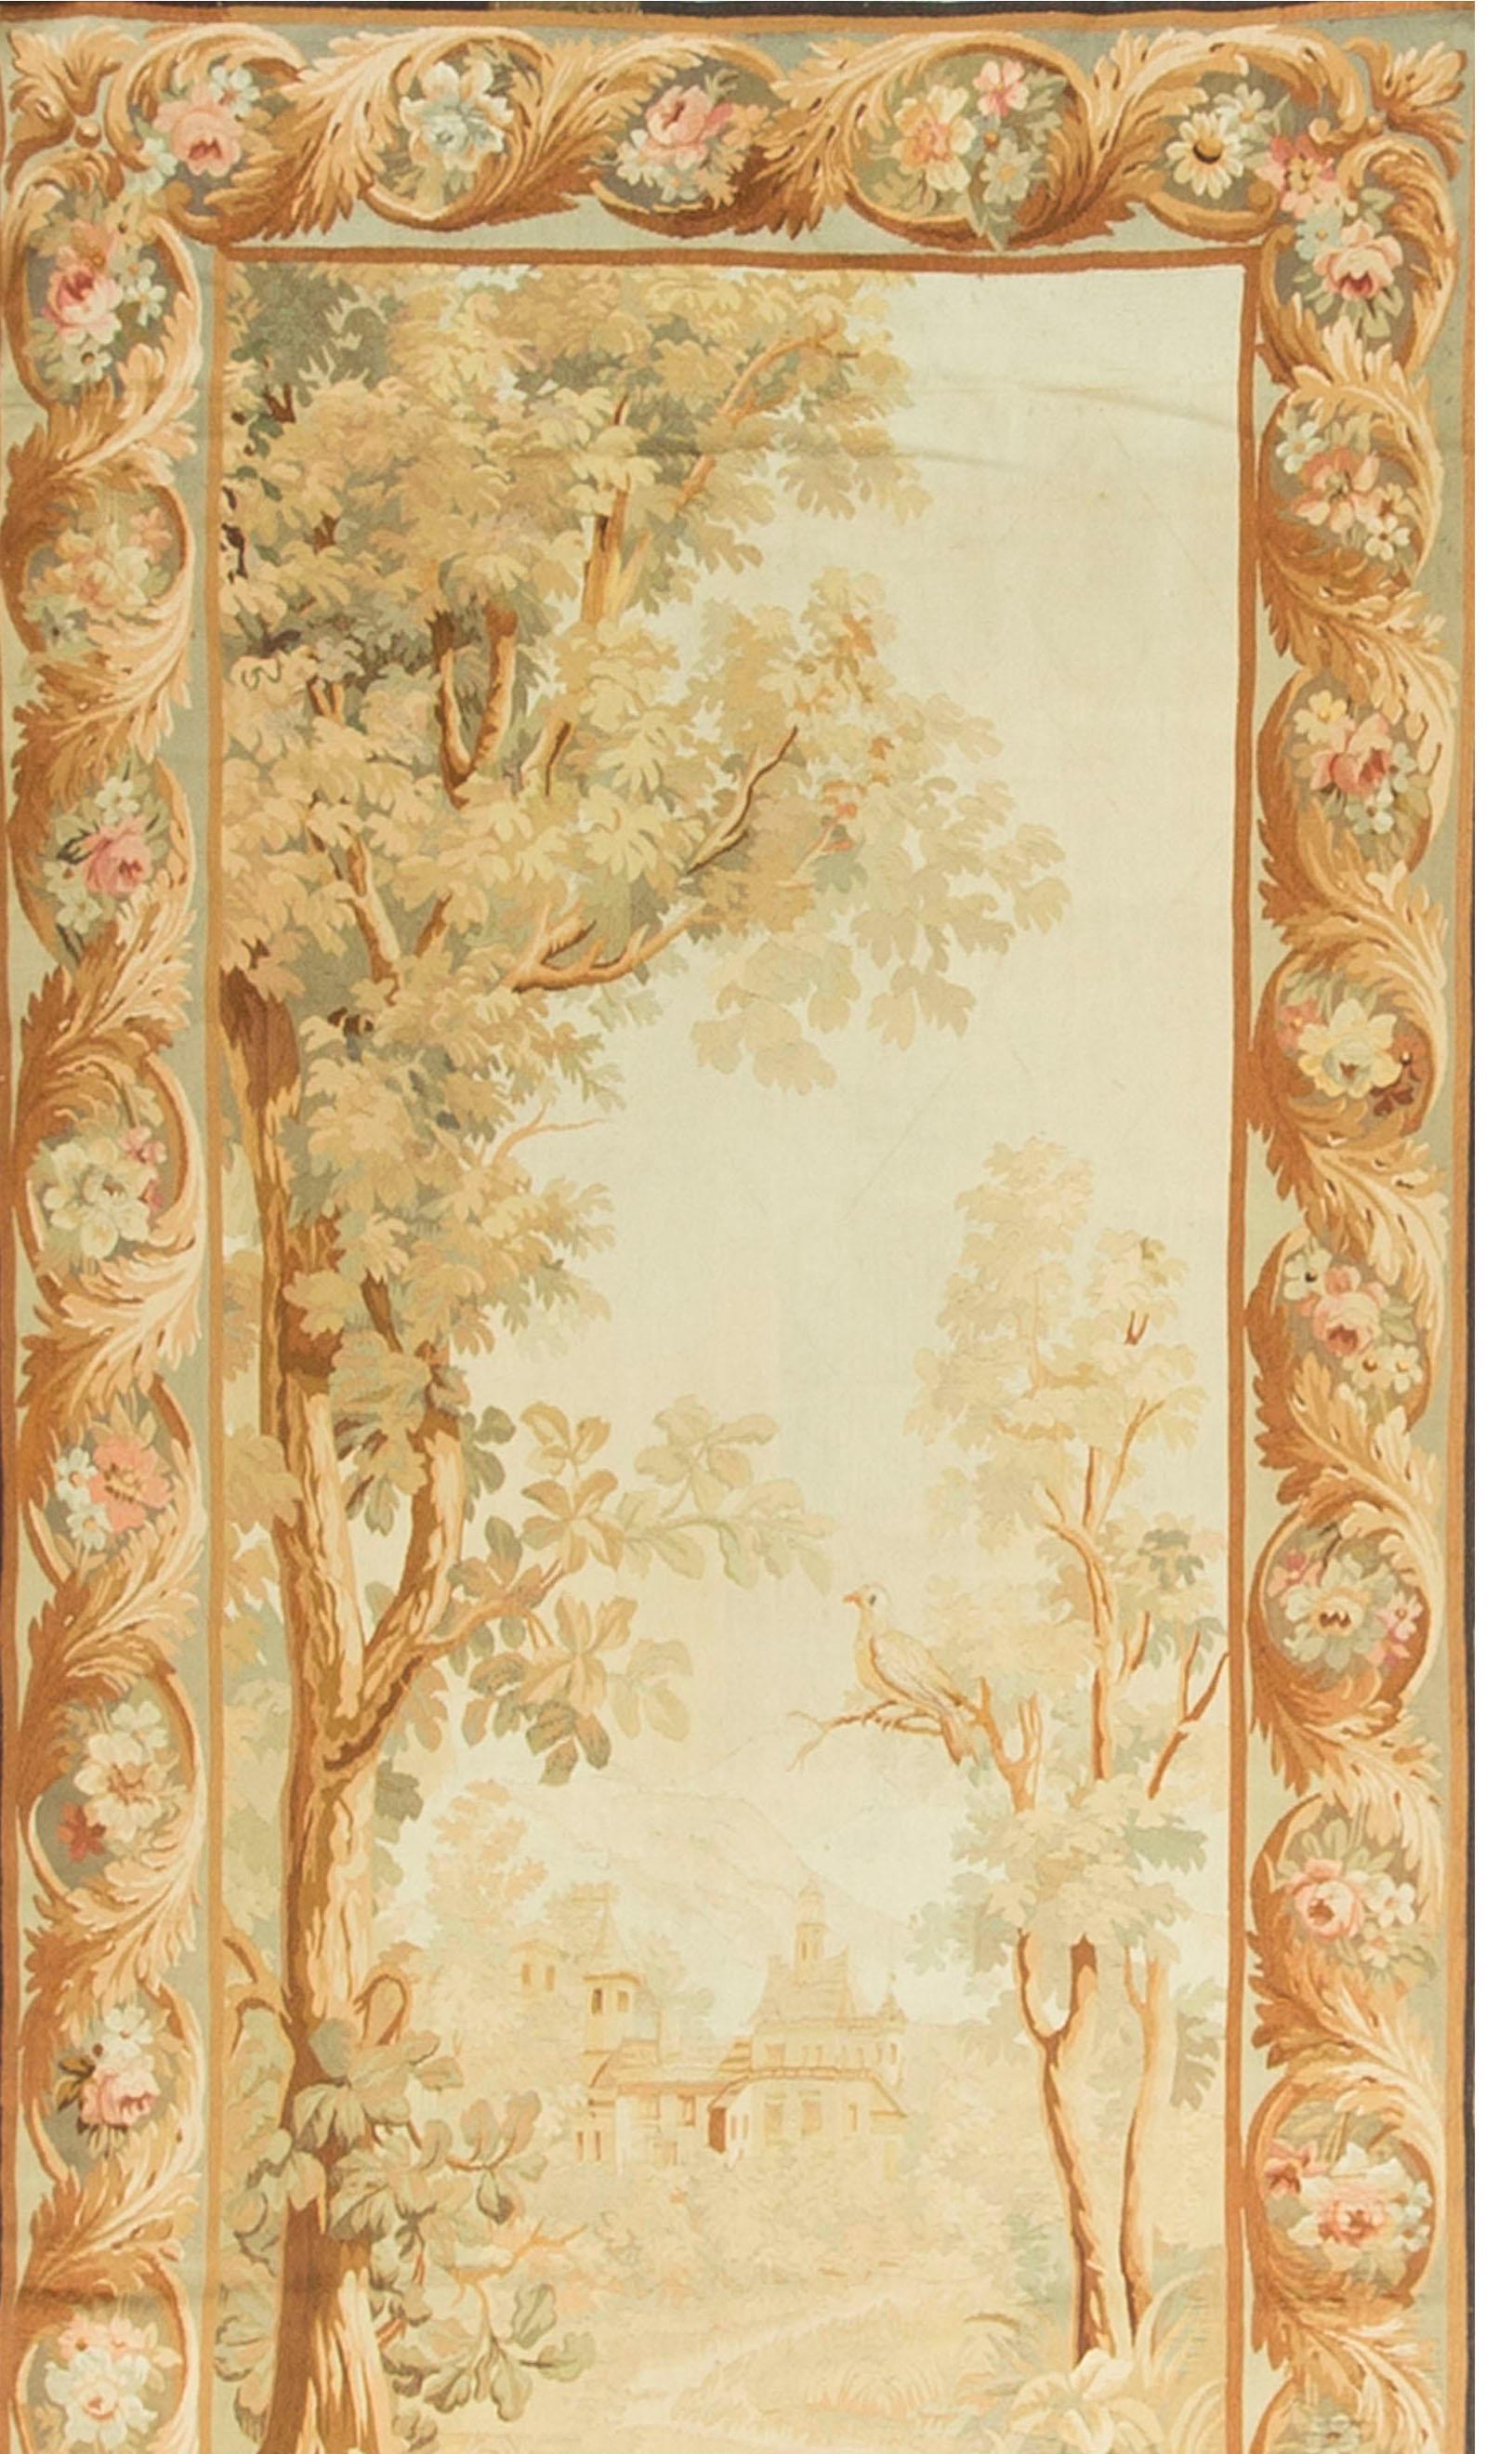 Hand-Woven French Aubusson Tapestry, circa 1850 For Sale